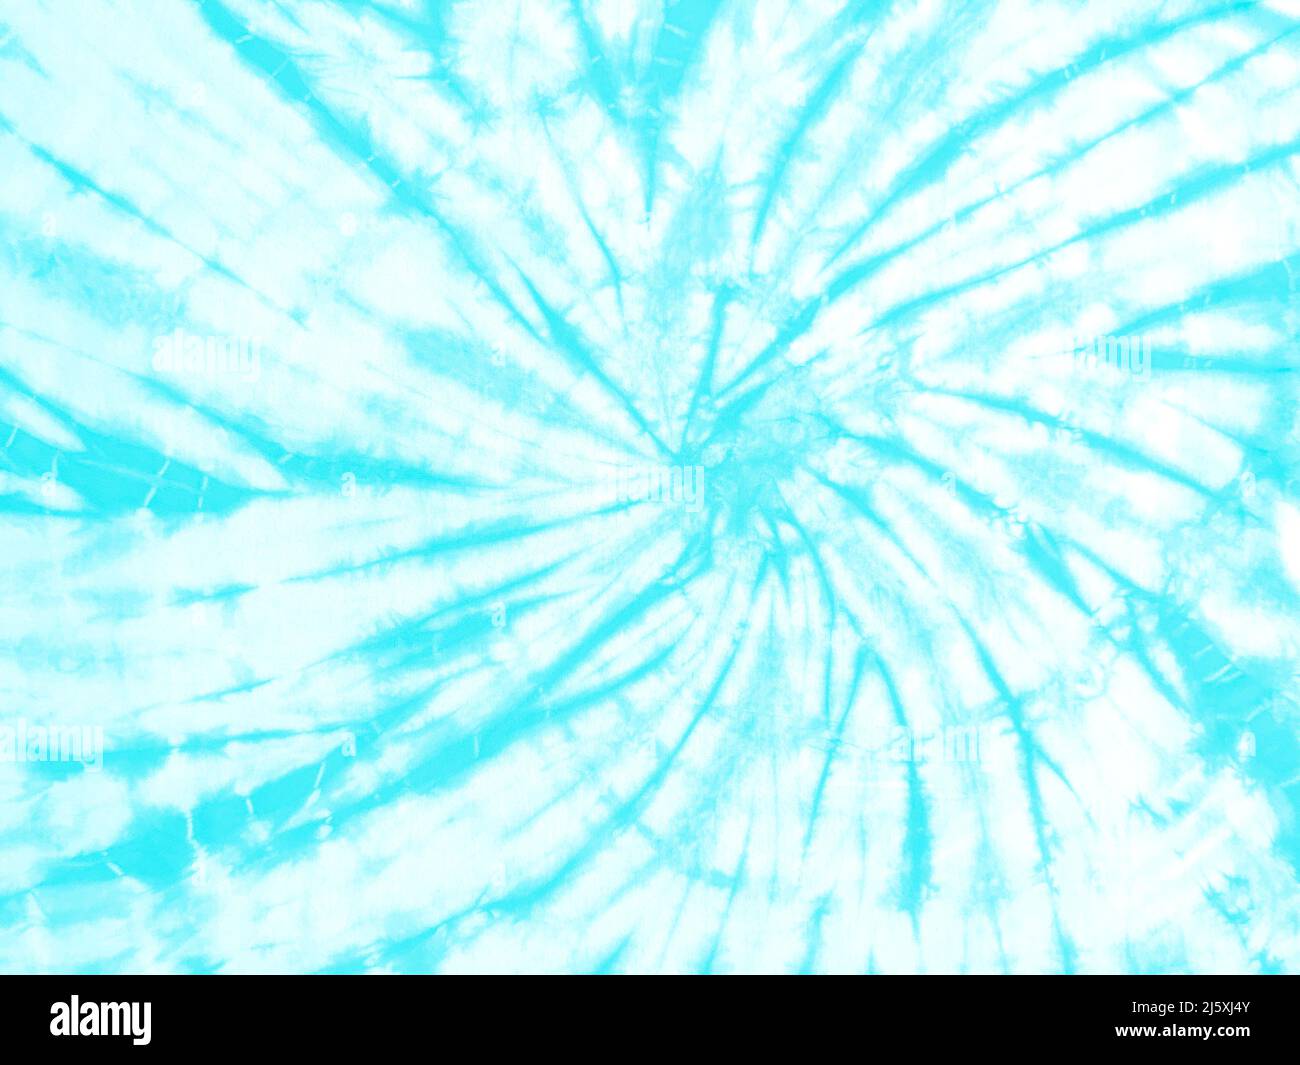 Tie dye shibori pattern. Abstract tie-dye technique hand dyed fabric.  Turquoise blue teal ornamental spiral elements on white background.  Abstract tex Stock Photo - Alamy